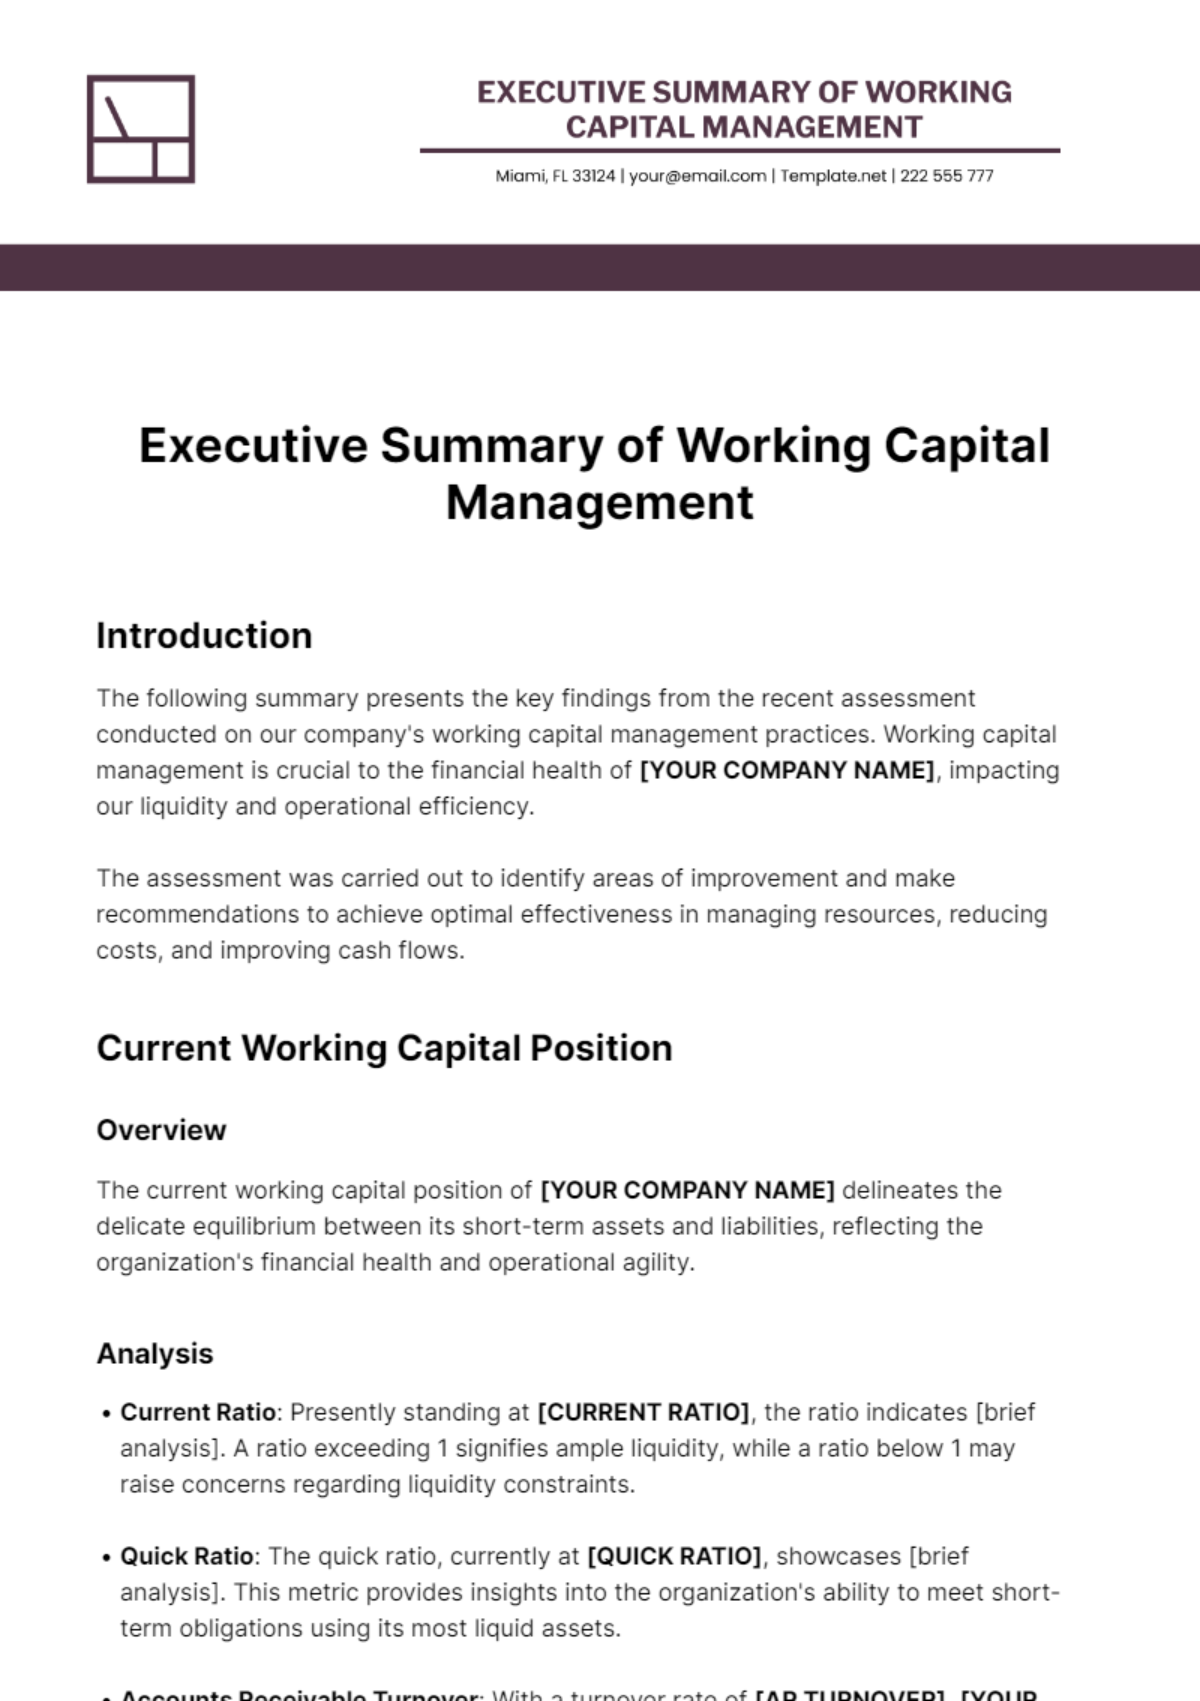 Executive Summary of Working Capital Management Template